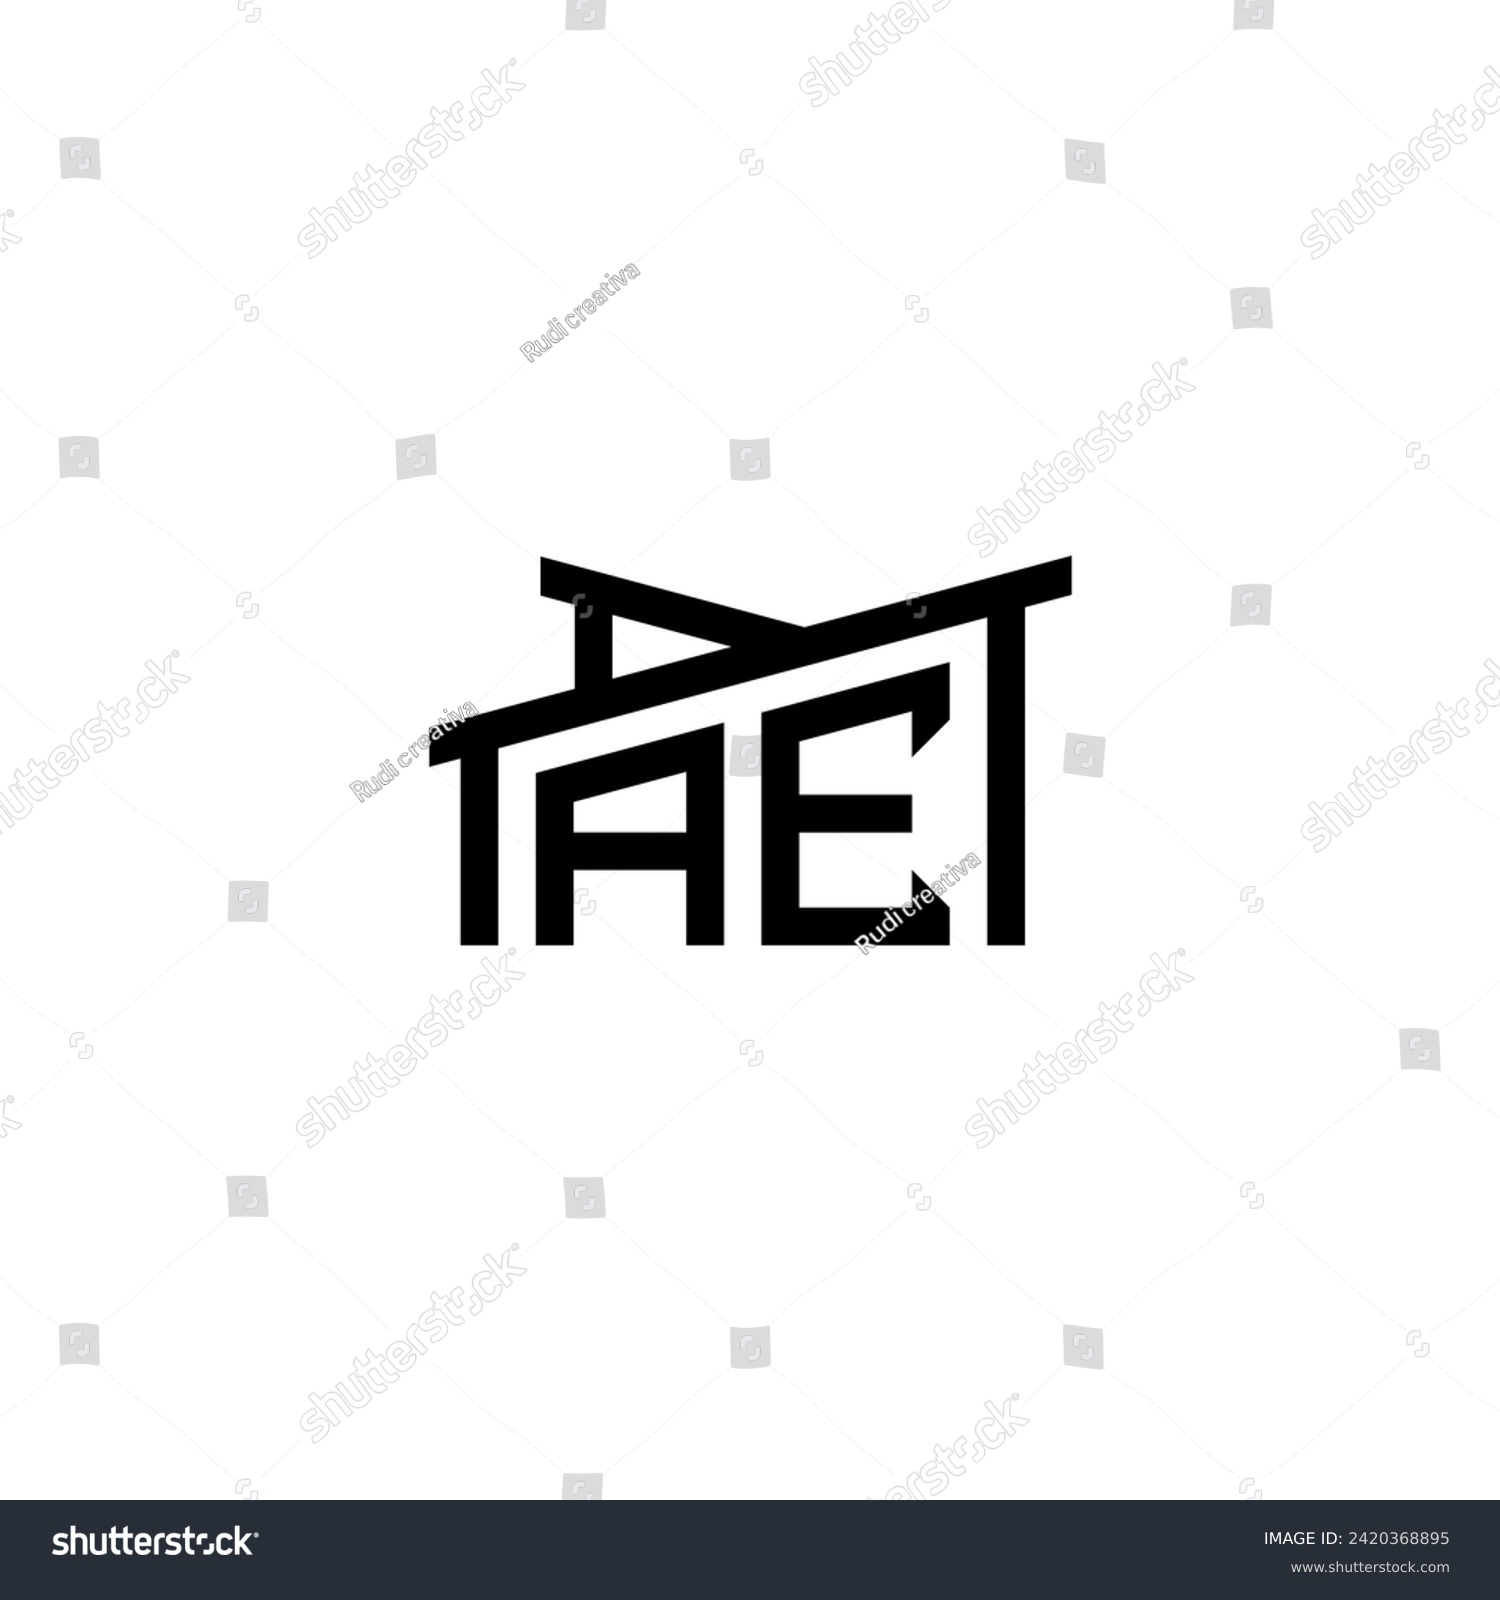 SVG of AE Initial Letter in Real Estate Logo concept.eps AE Initial Letter in Real Estate Logo concept svg